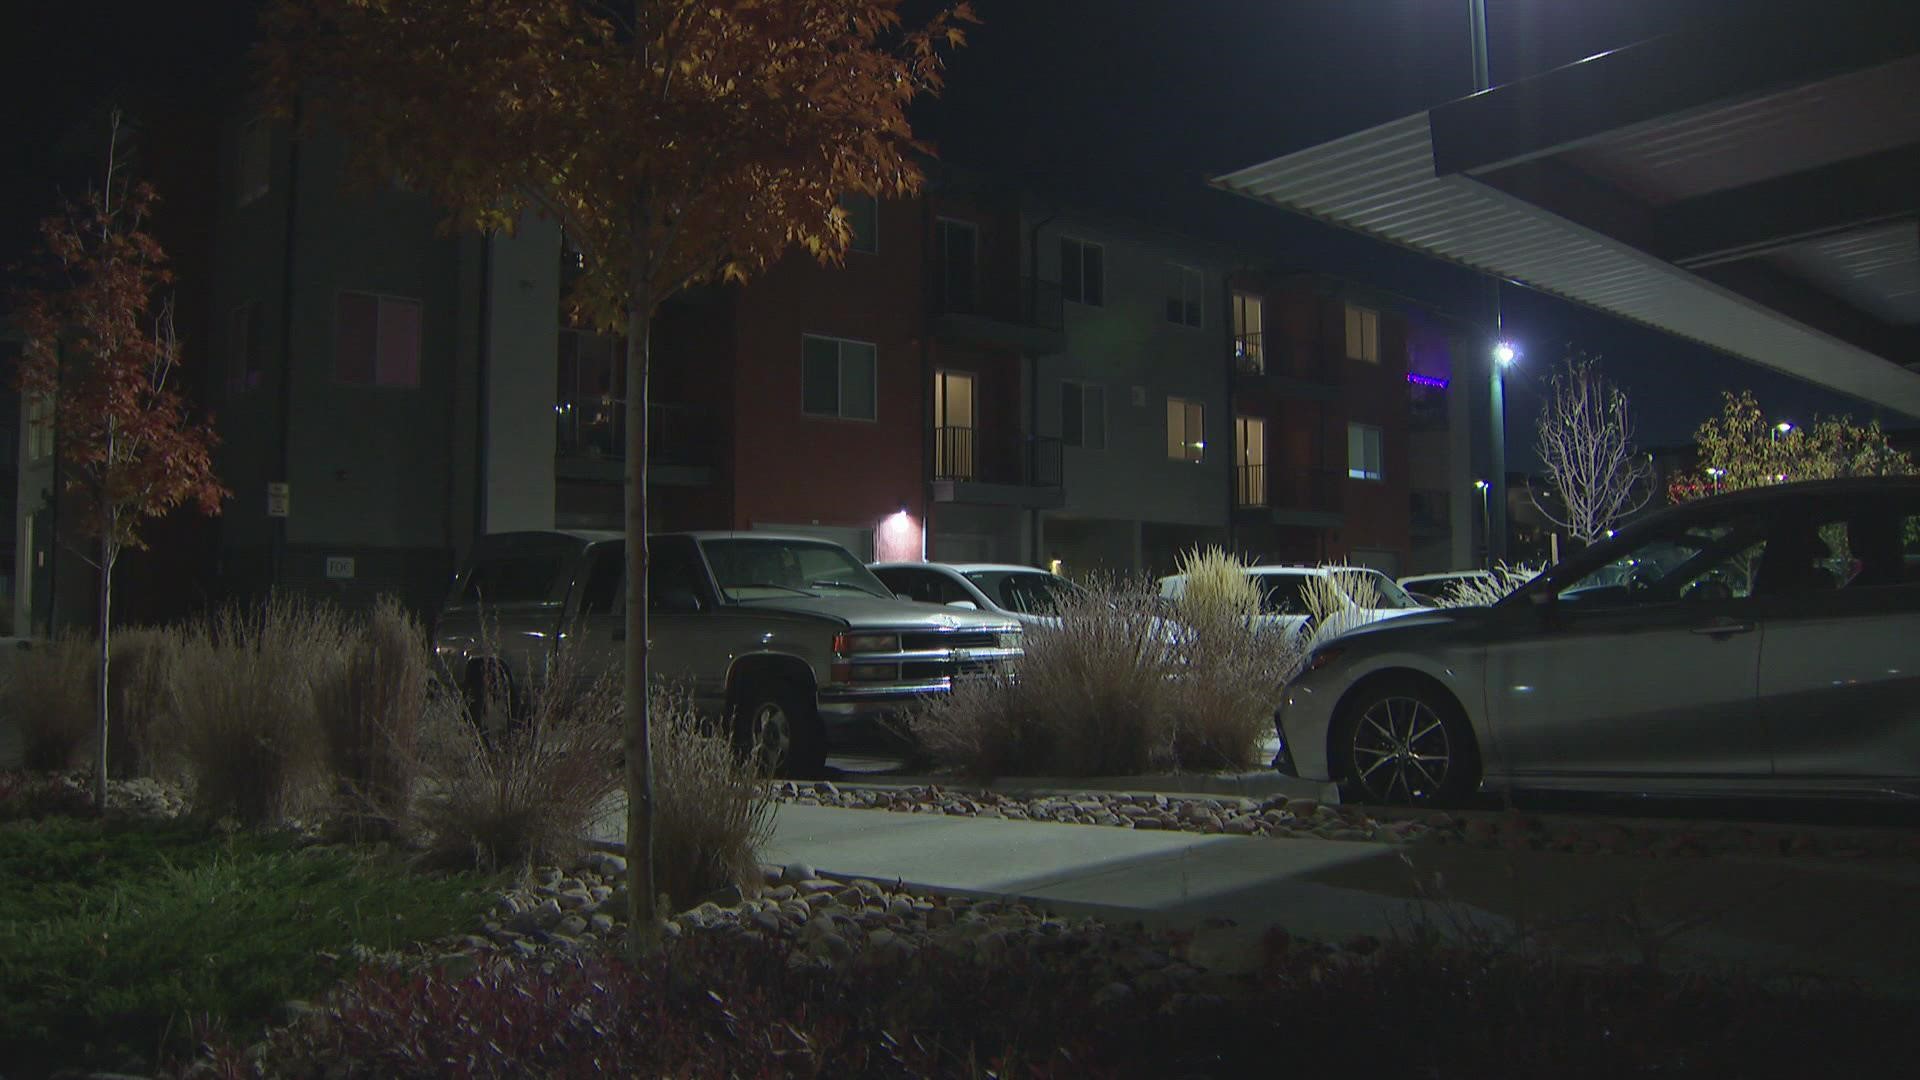 Officers are investigating after three people died at an apartment in a possible drug overdose in northeast Denver Sunday afternoon.